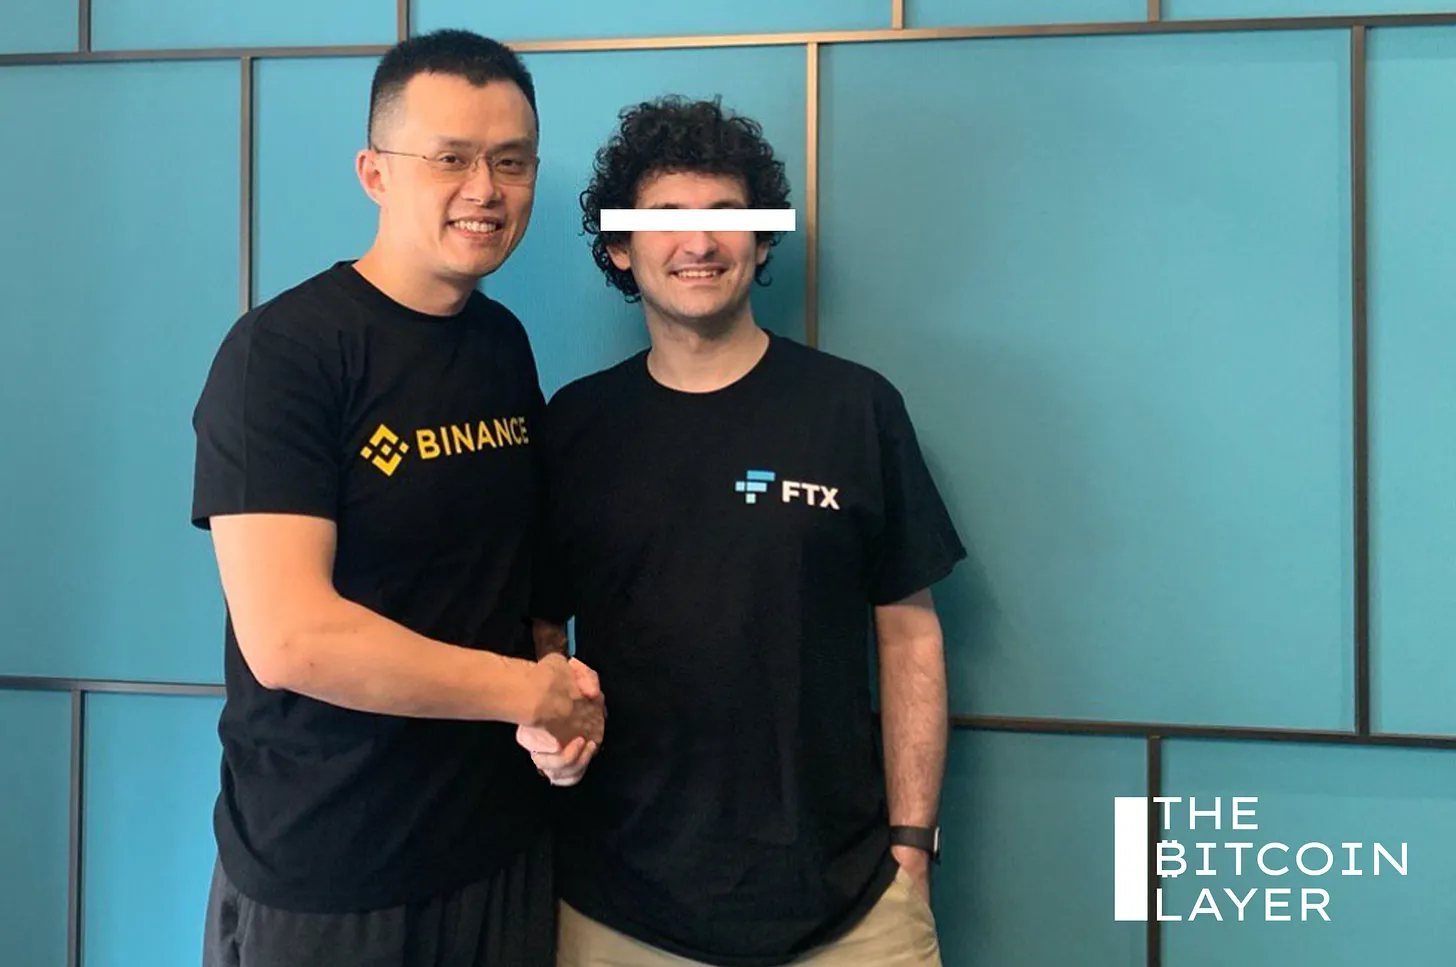 Binance Launches a Speculative Attack Against FTX, and Wins